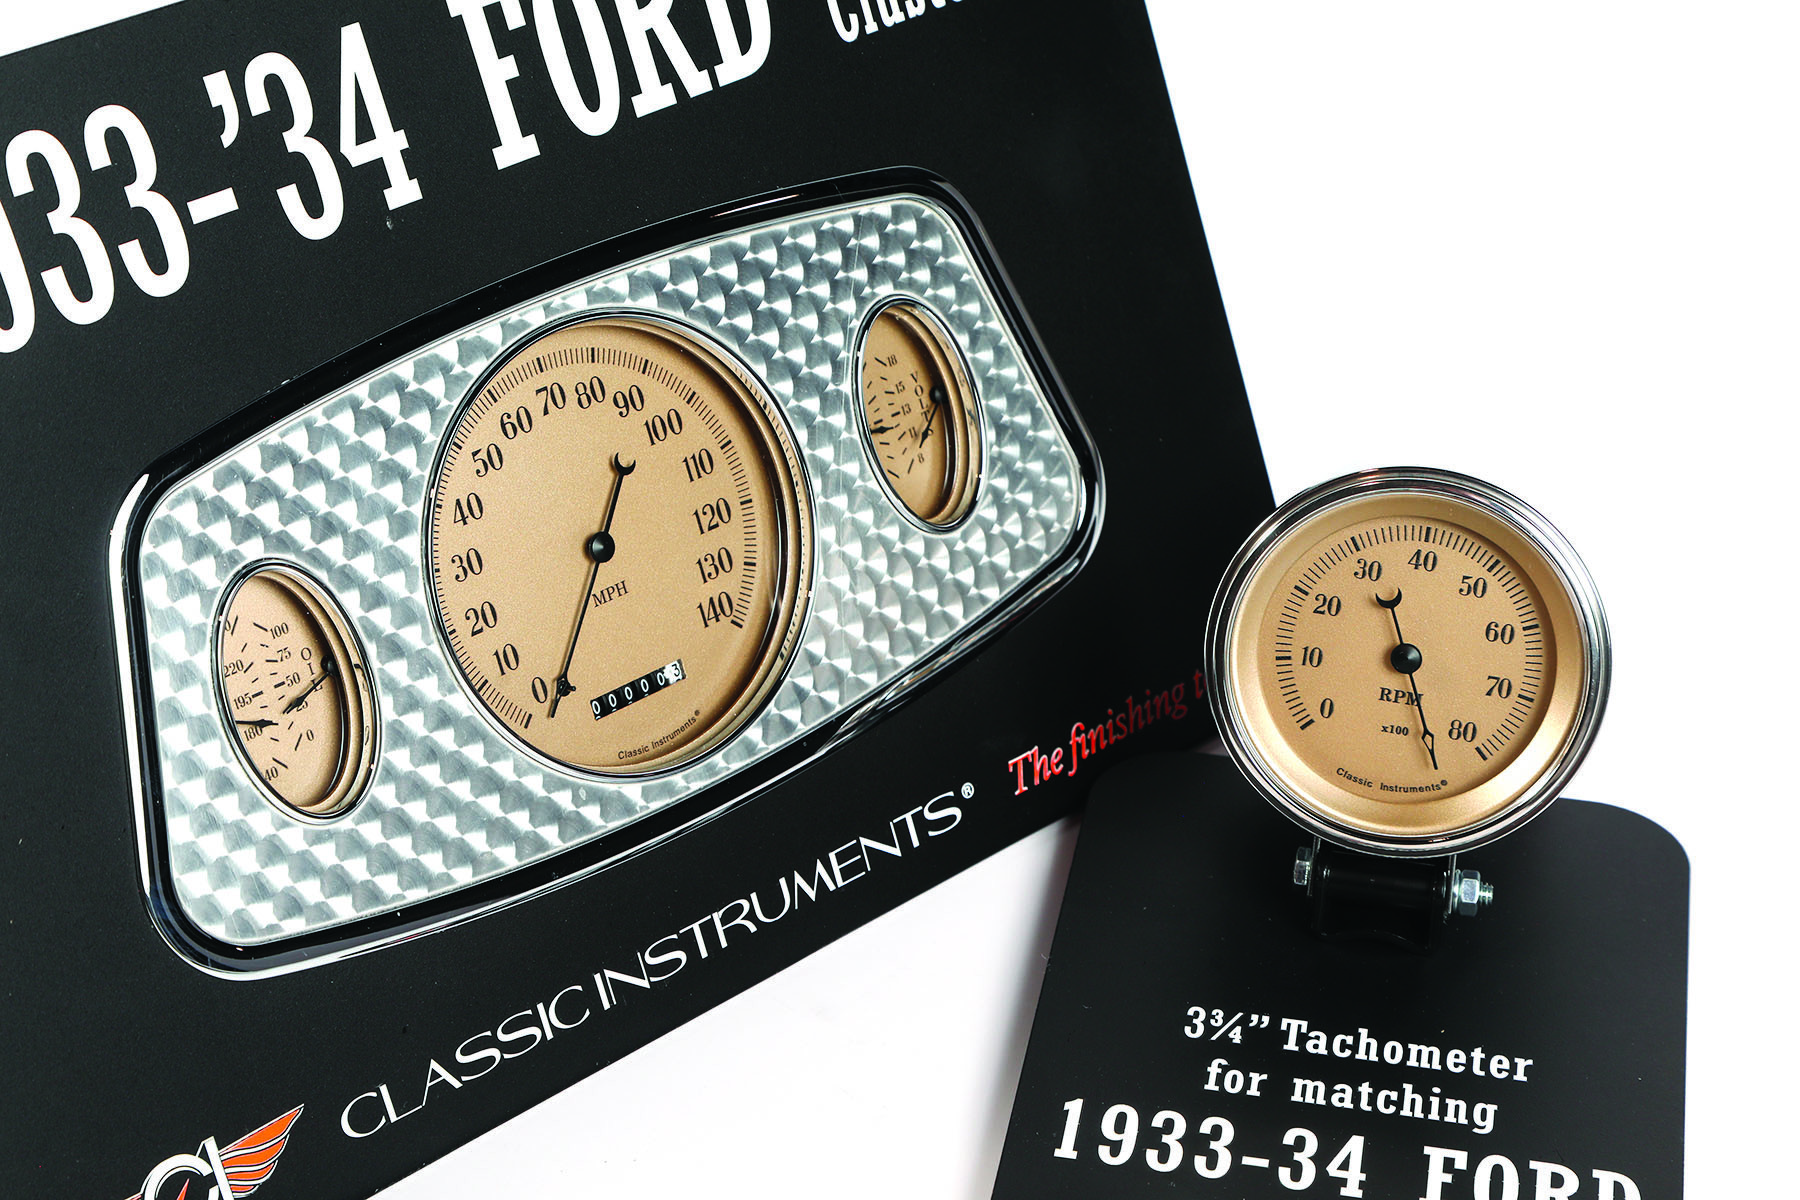 New Products: Early Ford V-8 Gauges, Bolt-On Calipers For 1960s Fords, Complete Oil Change For Chevrolets, And Scout Wiring Kit